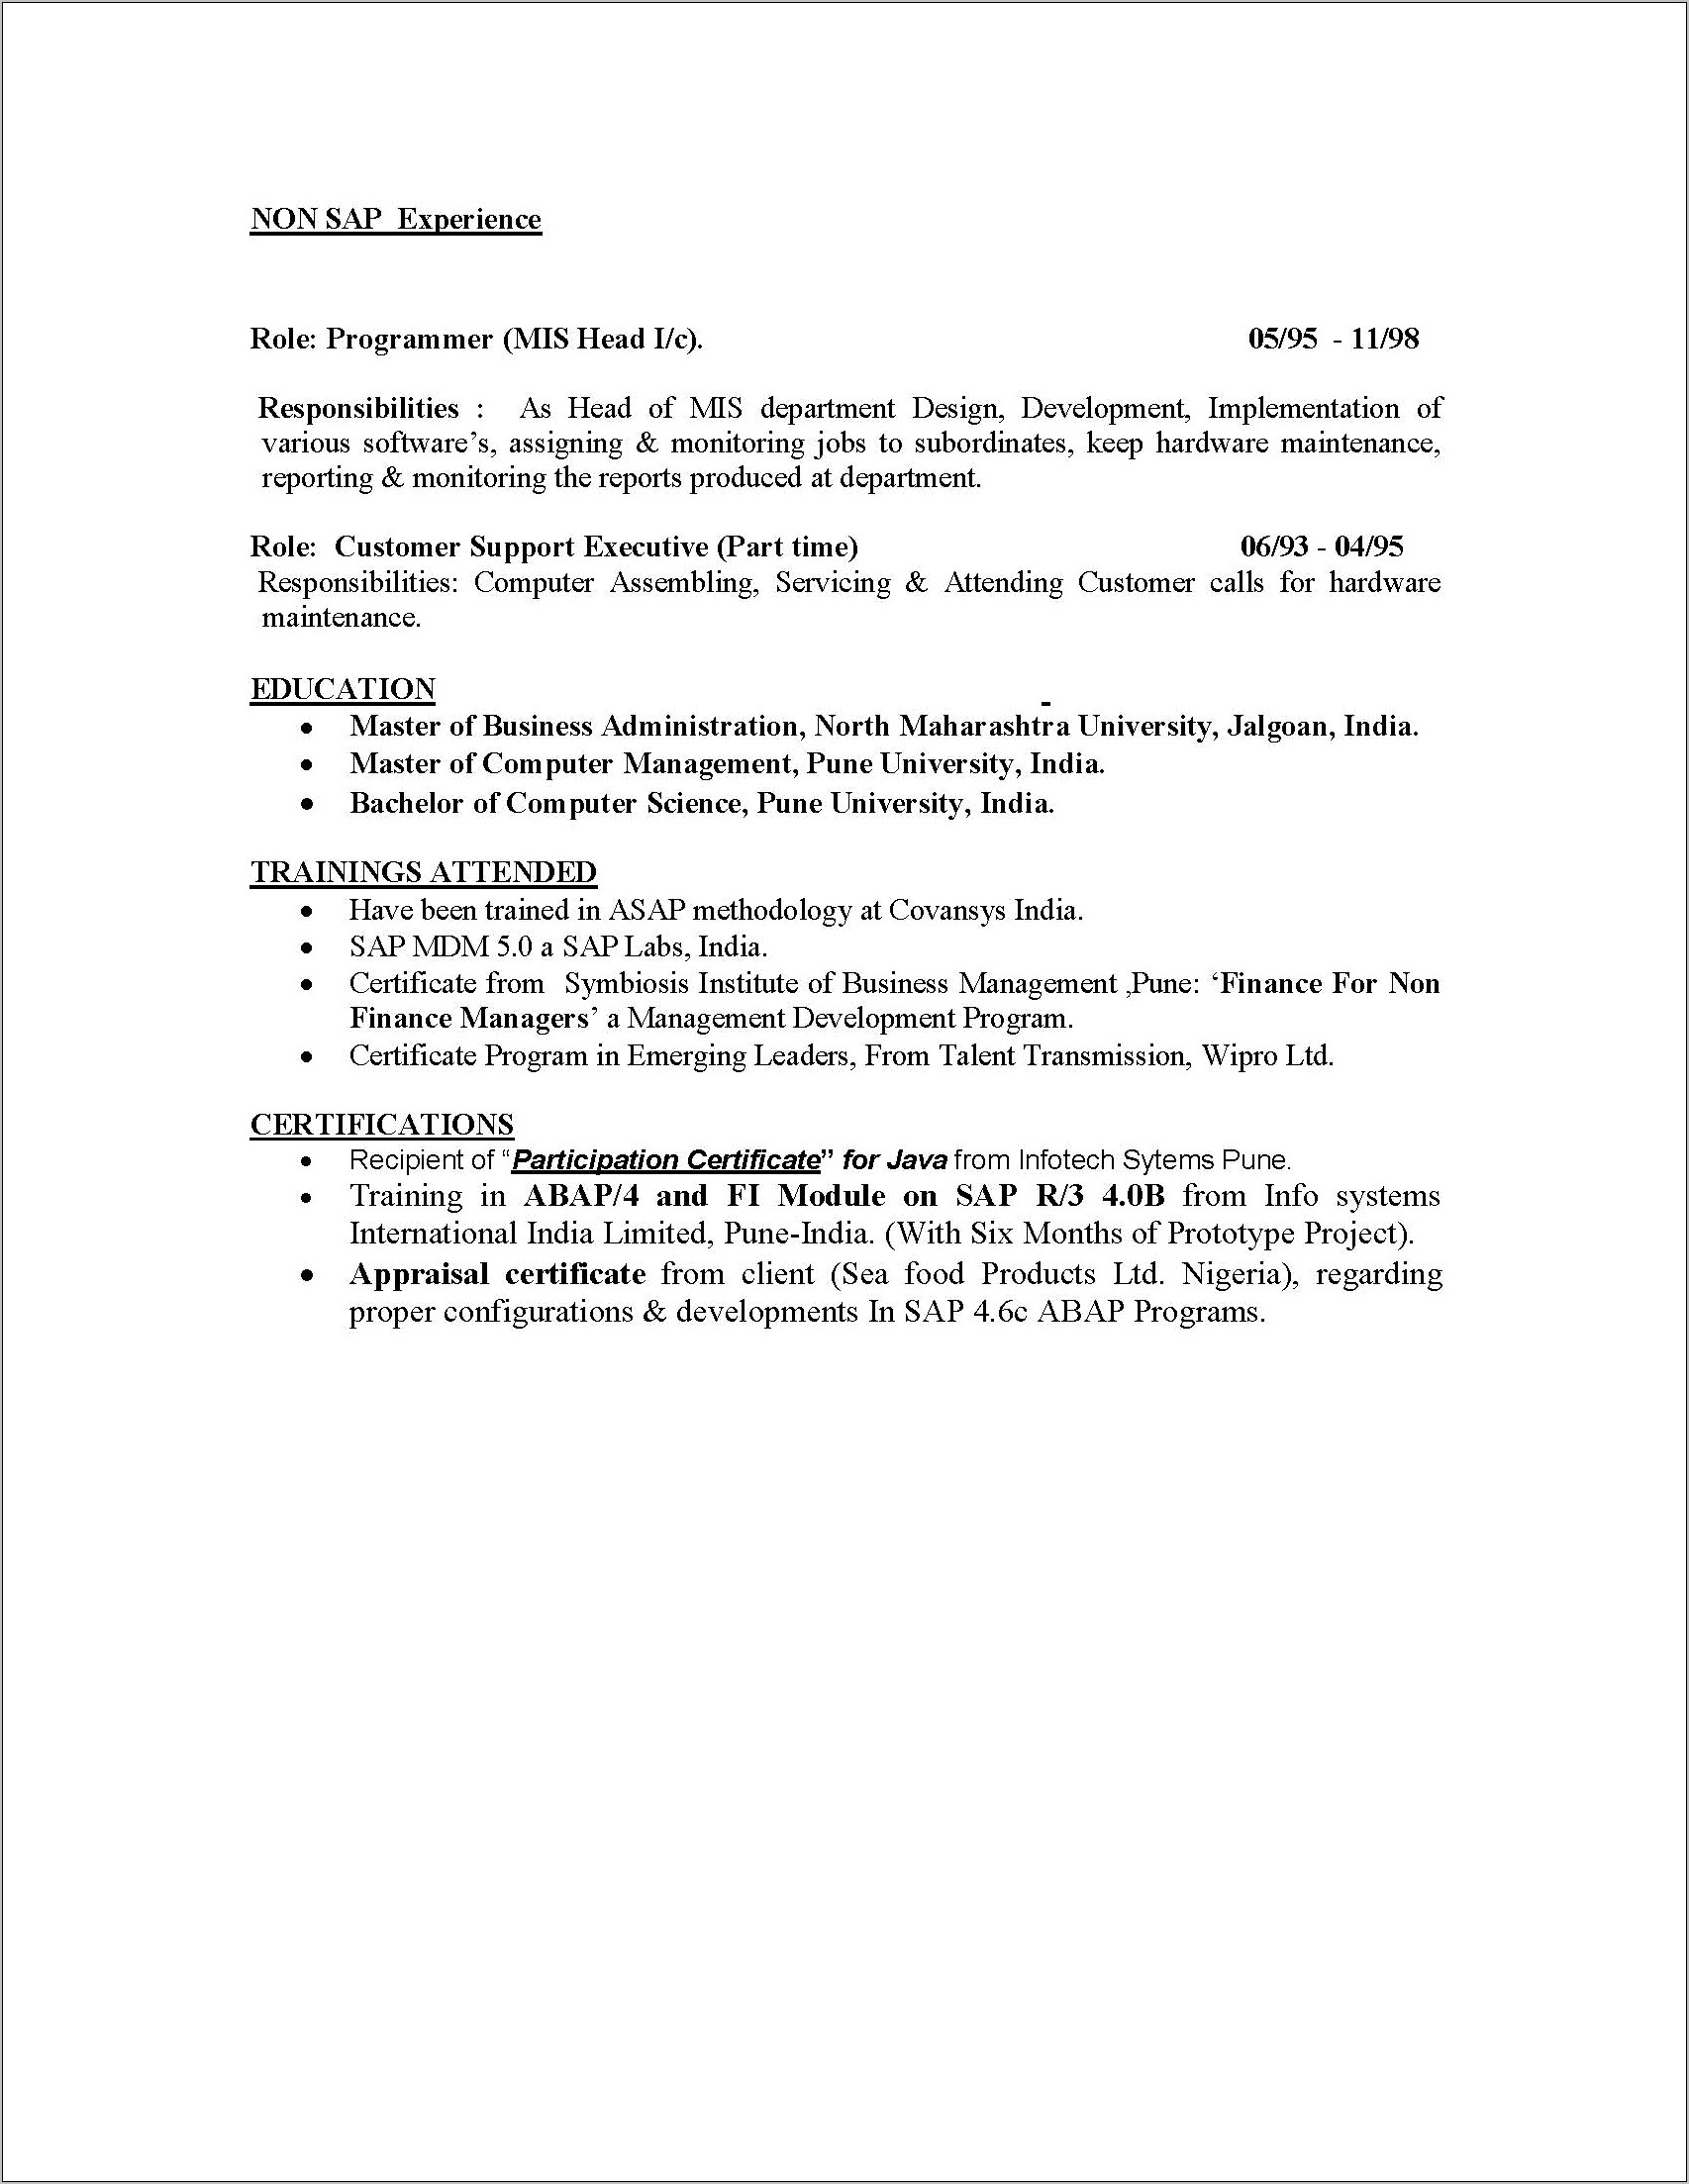 Ba Sample Resume With Pos Experience